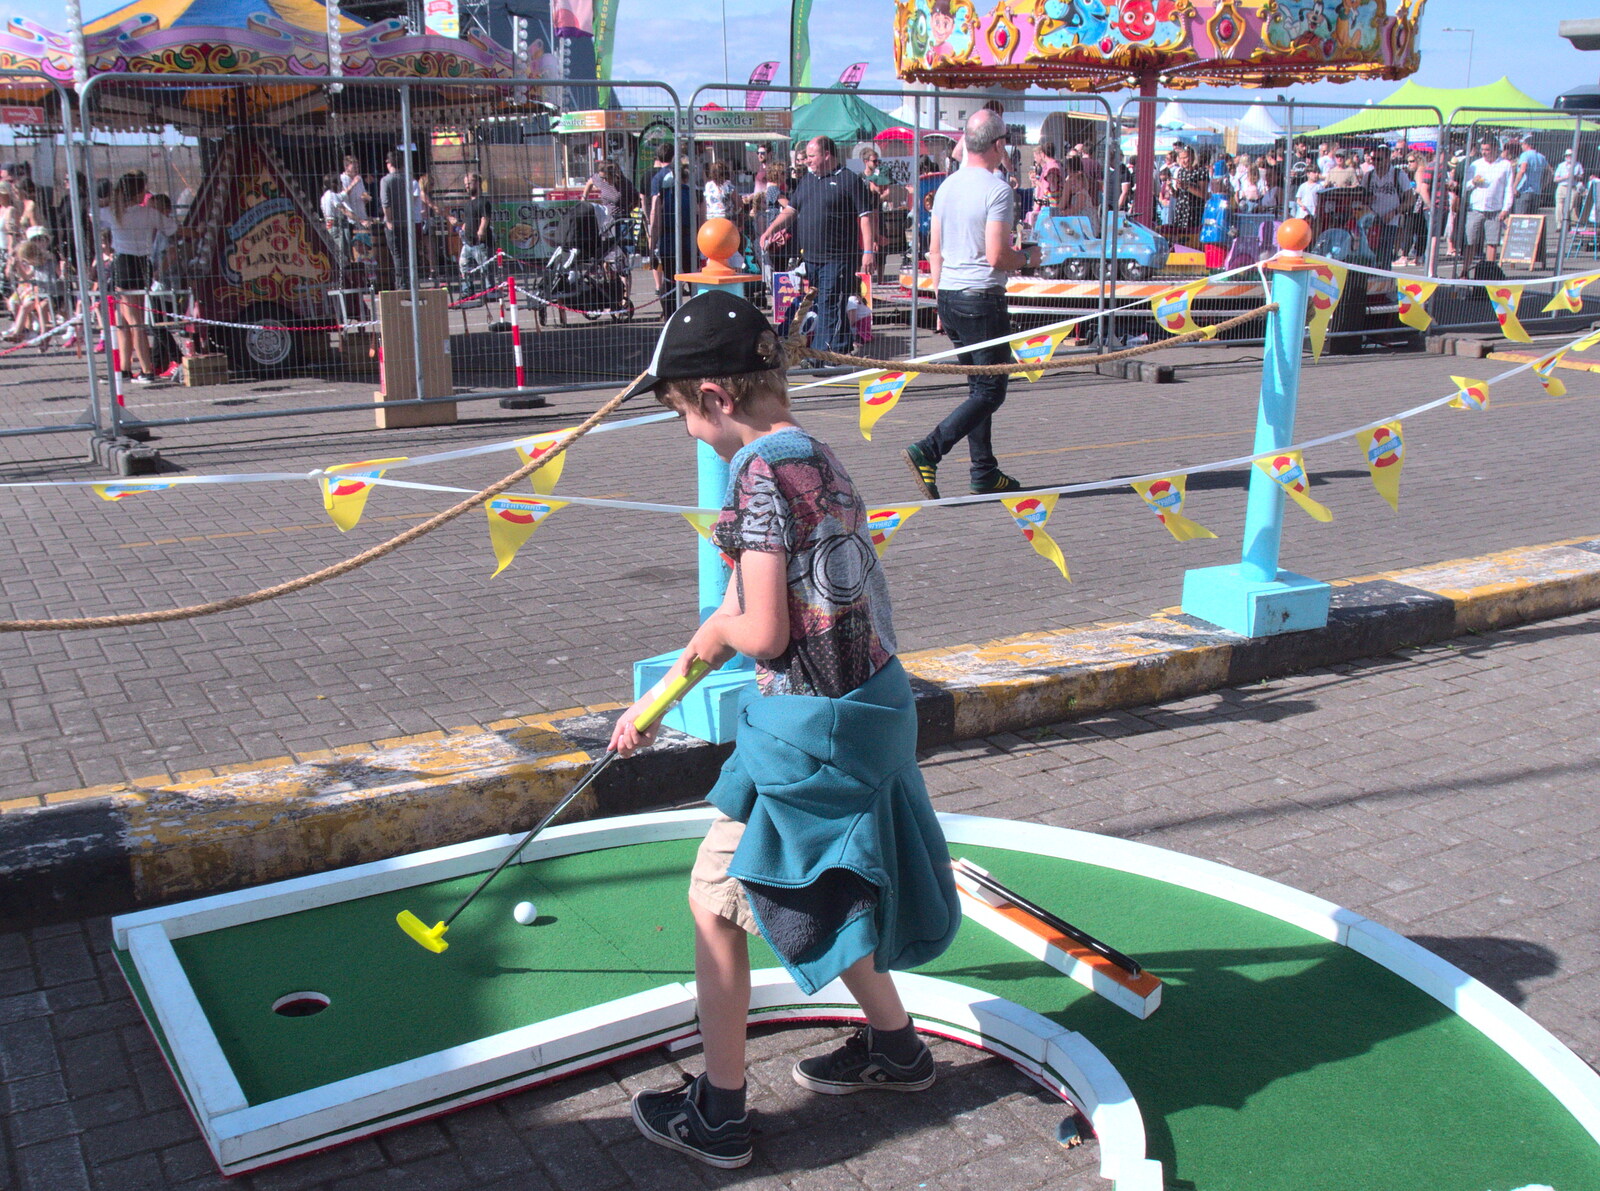 Fred does crazy golf from Beatyard Festival, Dún Laoghaire, County Dublin, Ireland - 5th August 2018